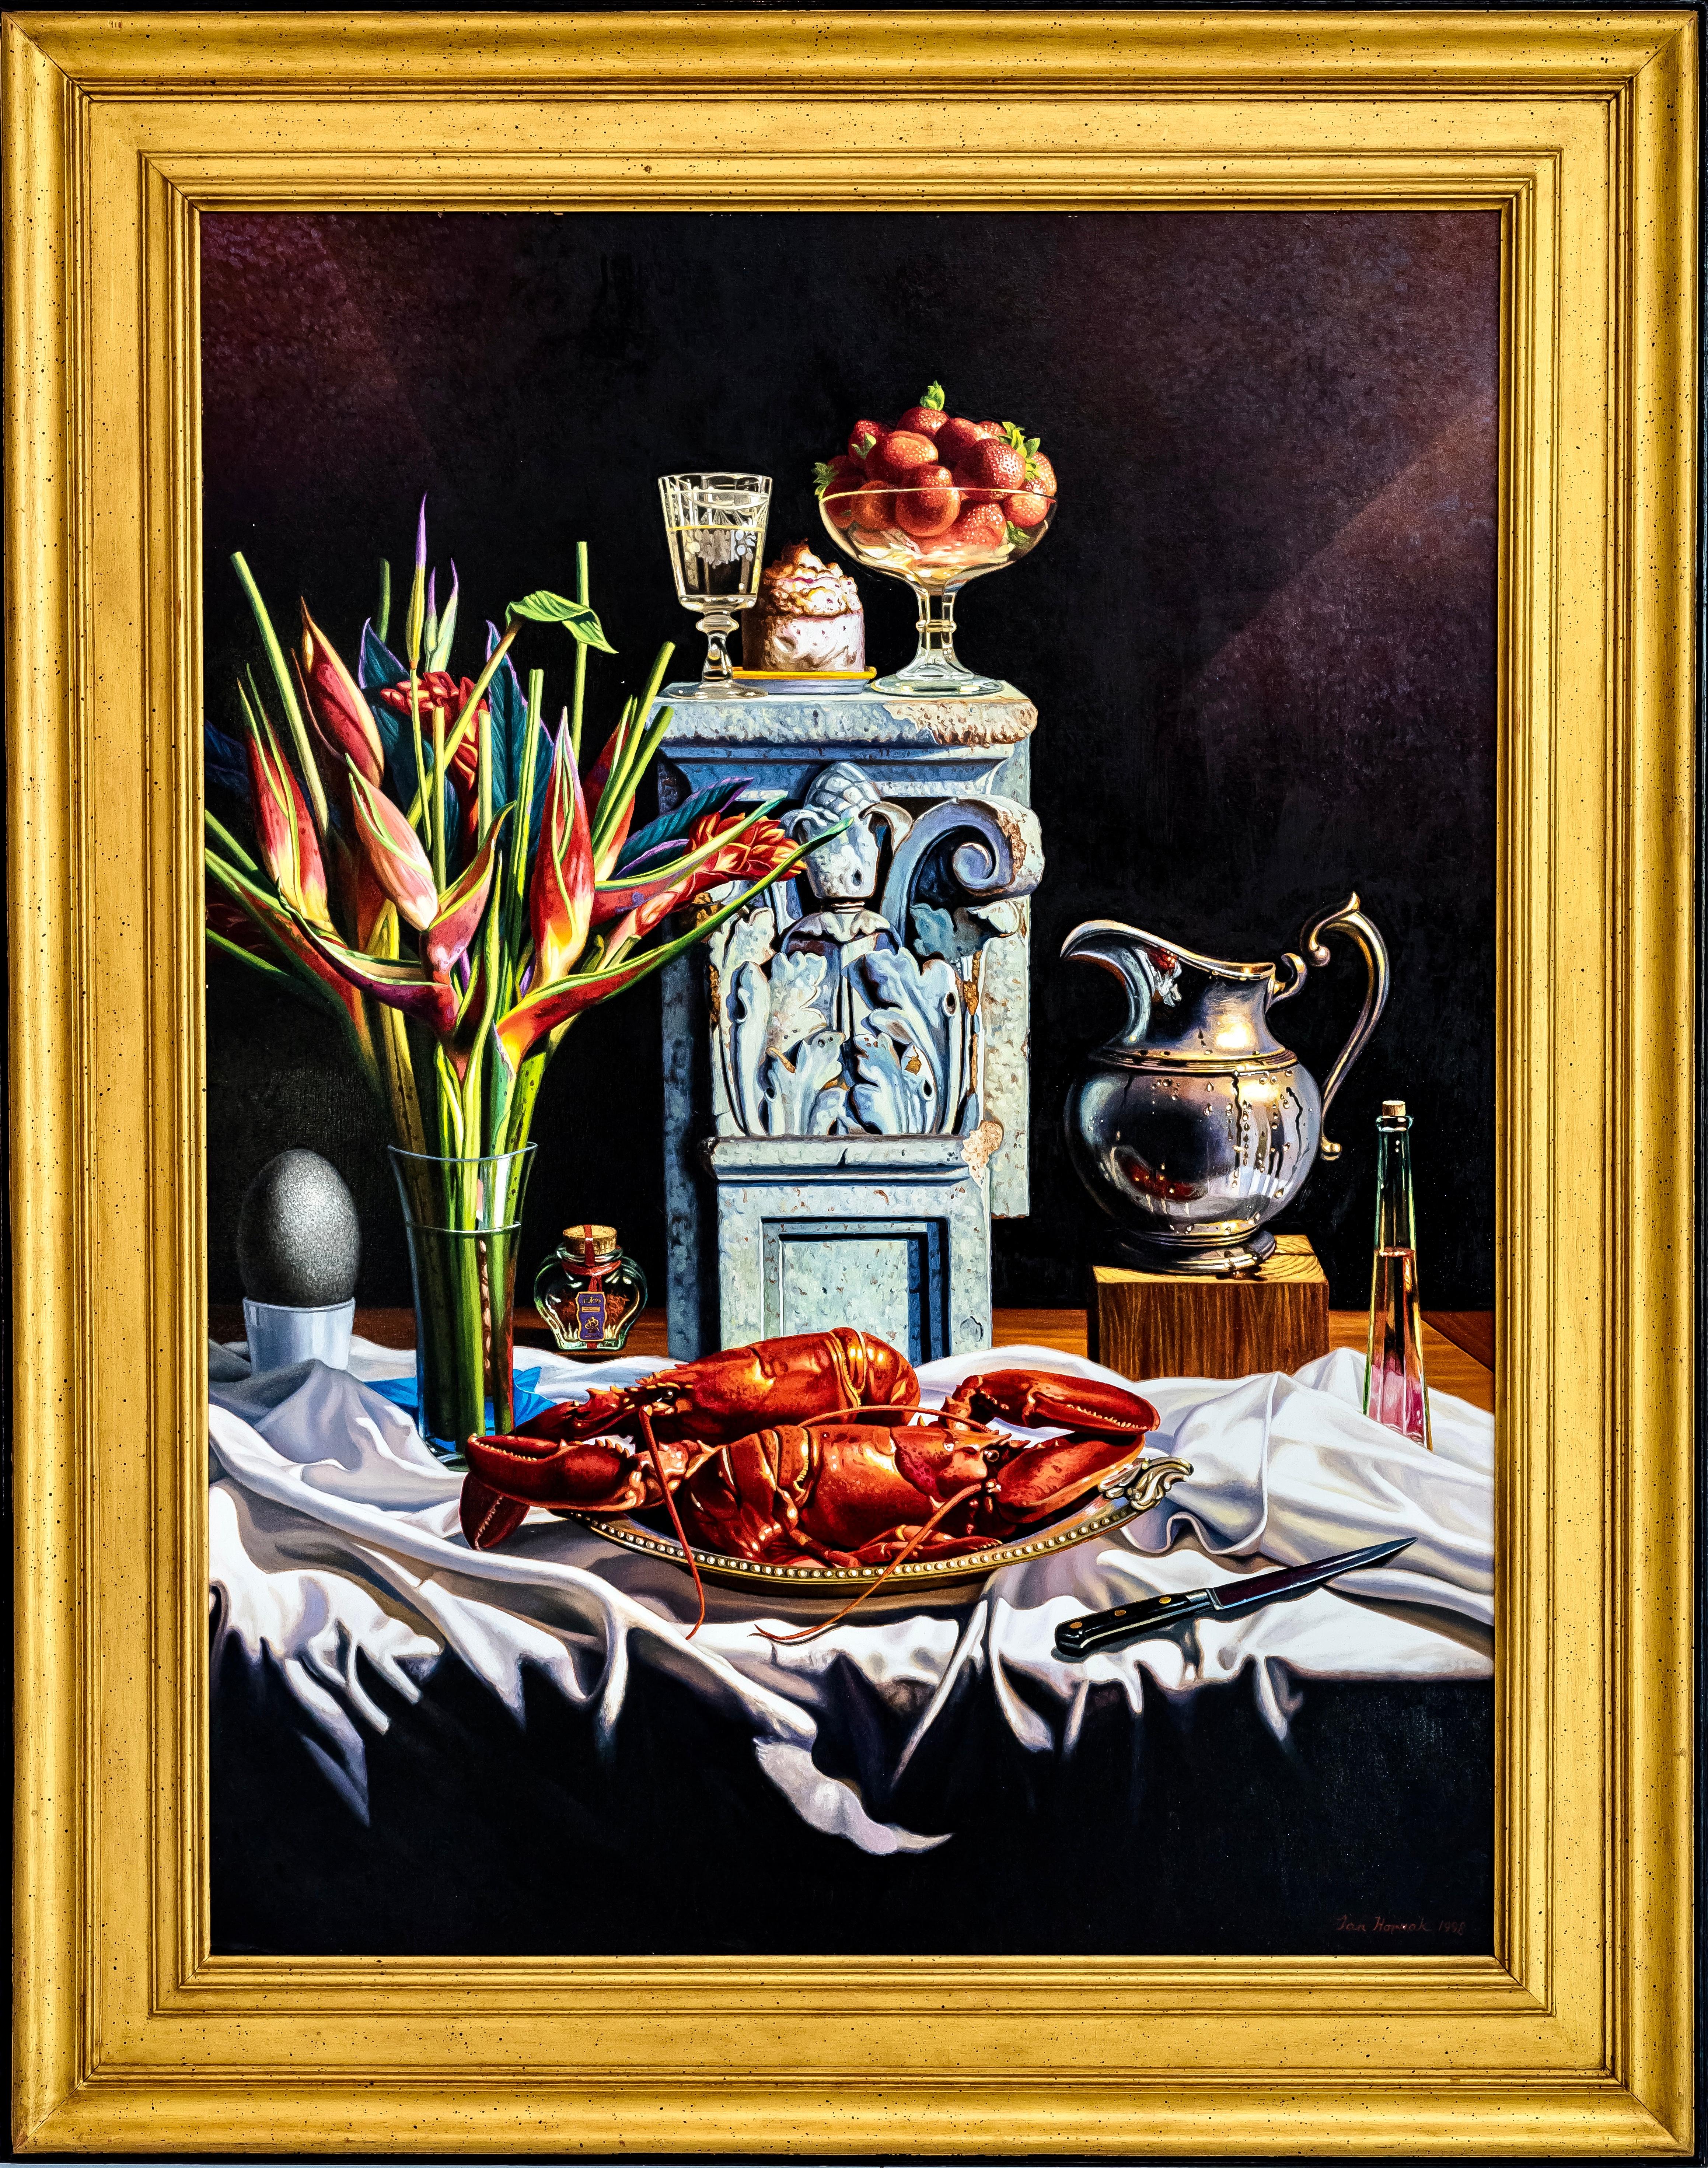 Still Life with Lobster, Helicona, & Silver Pitcher - Black Still-Life Painting by Ian Hornak